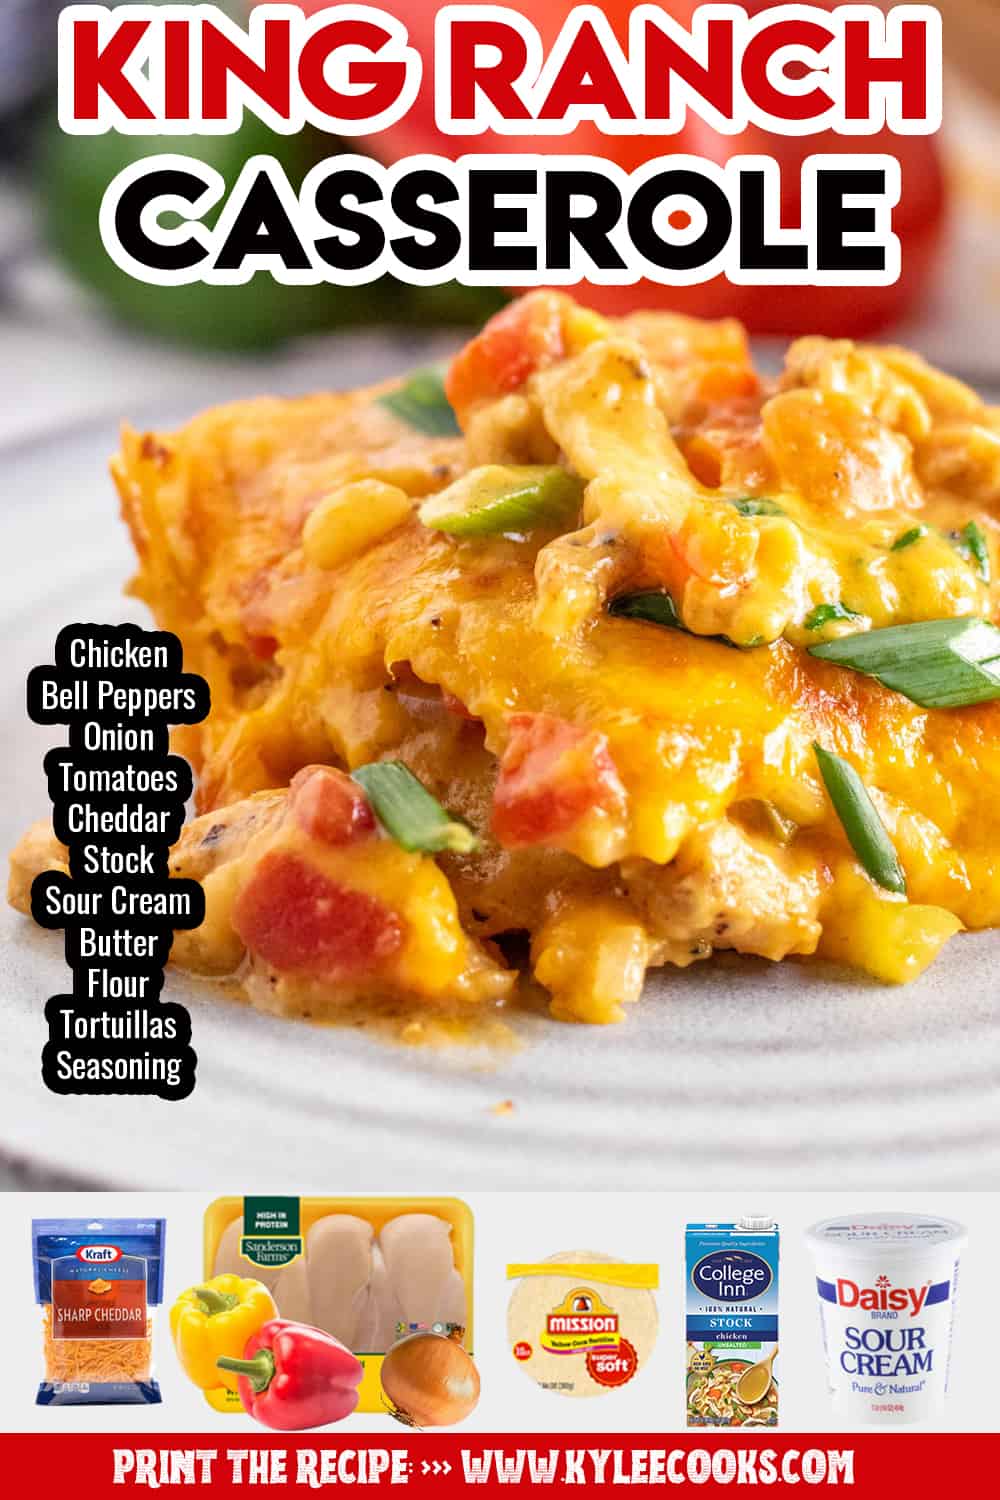 King ranch casserole on a plate with recipe name and ingredients overlaid in text and images.